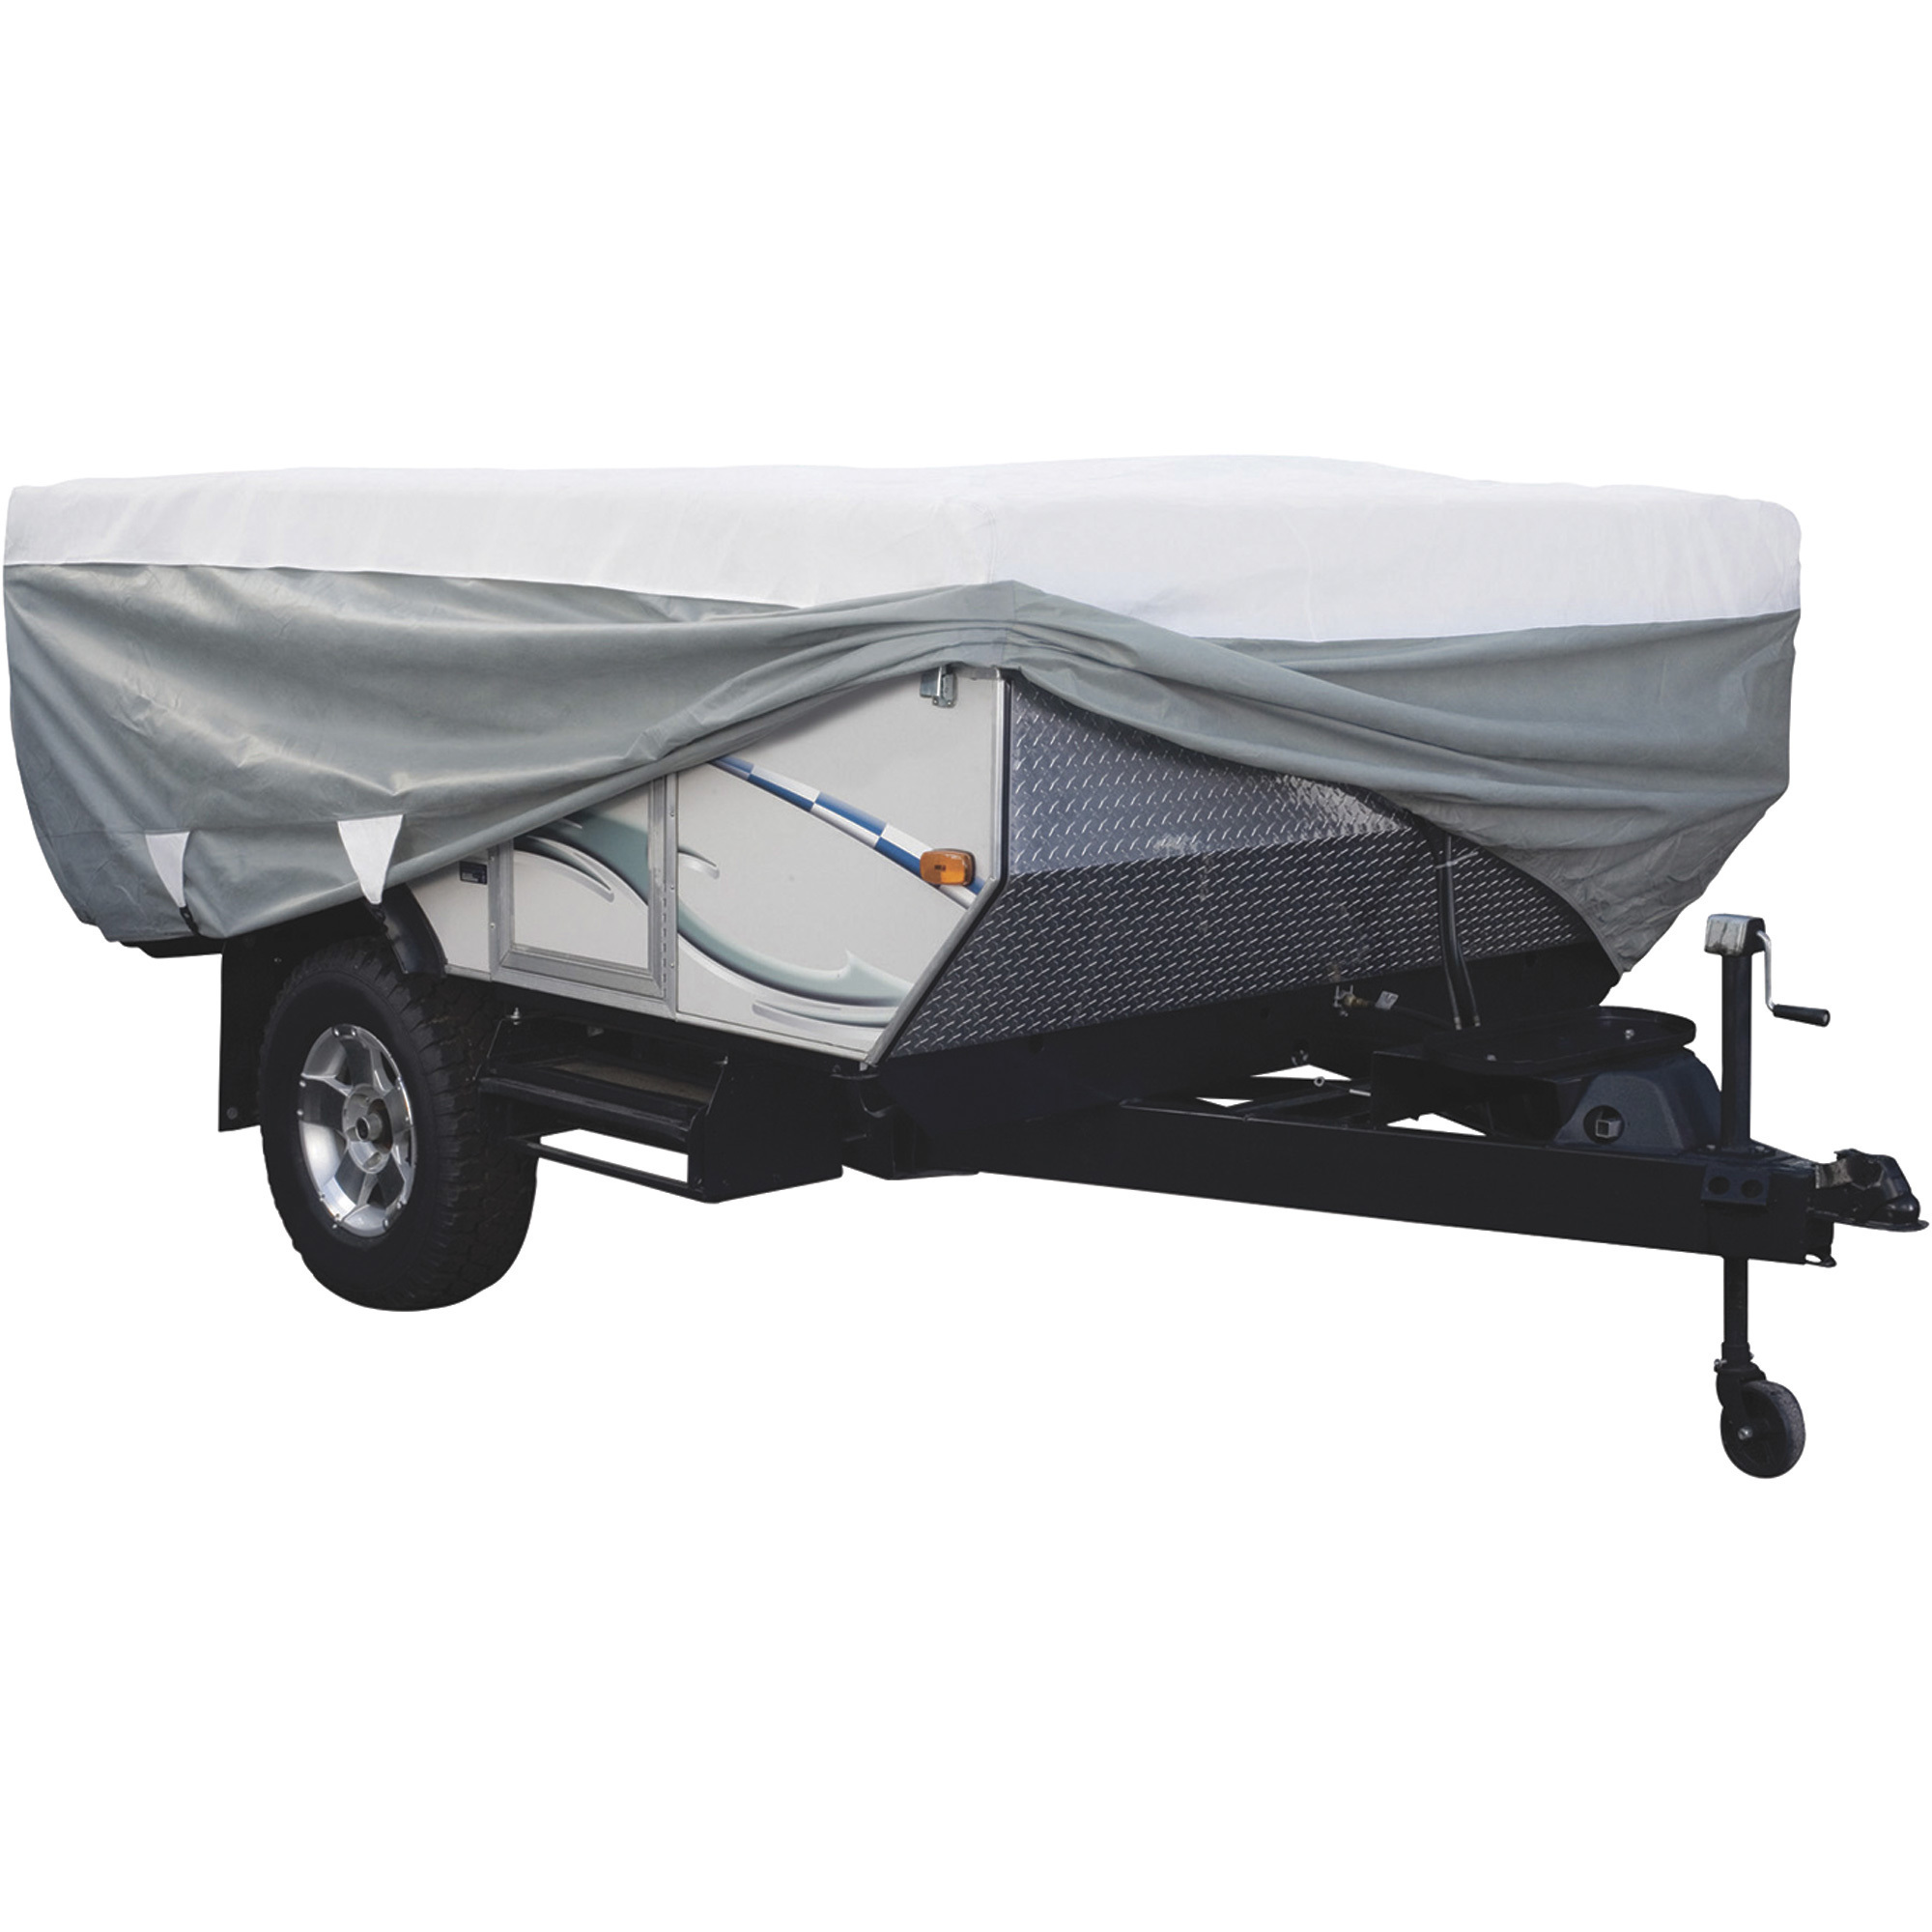 Classic Accessories OverDrive PolyPro 3 Deluxe Folding Camper Trailer Cover,  Gray and White, Fits 8ft.L-10ft.L Campers, Model# 8003814310600